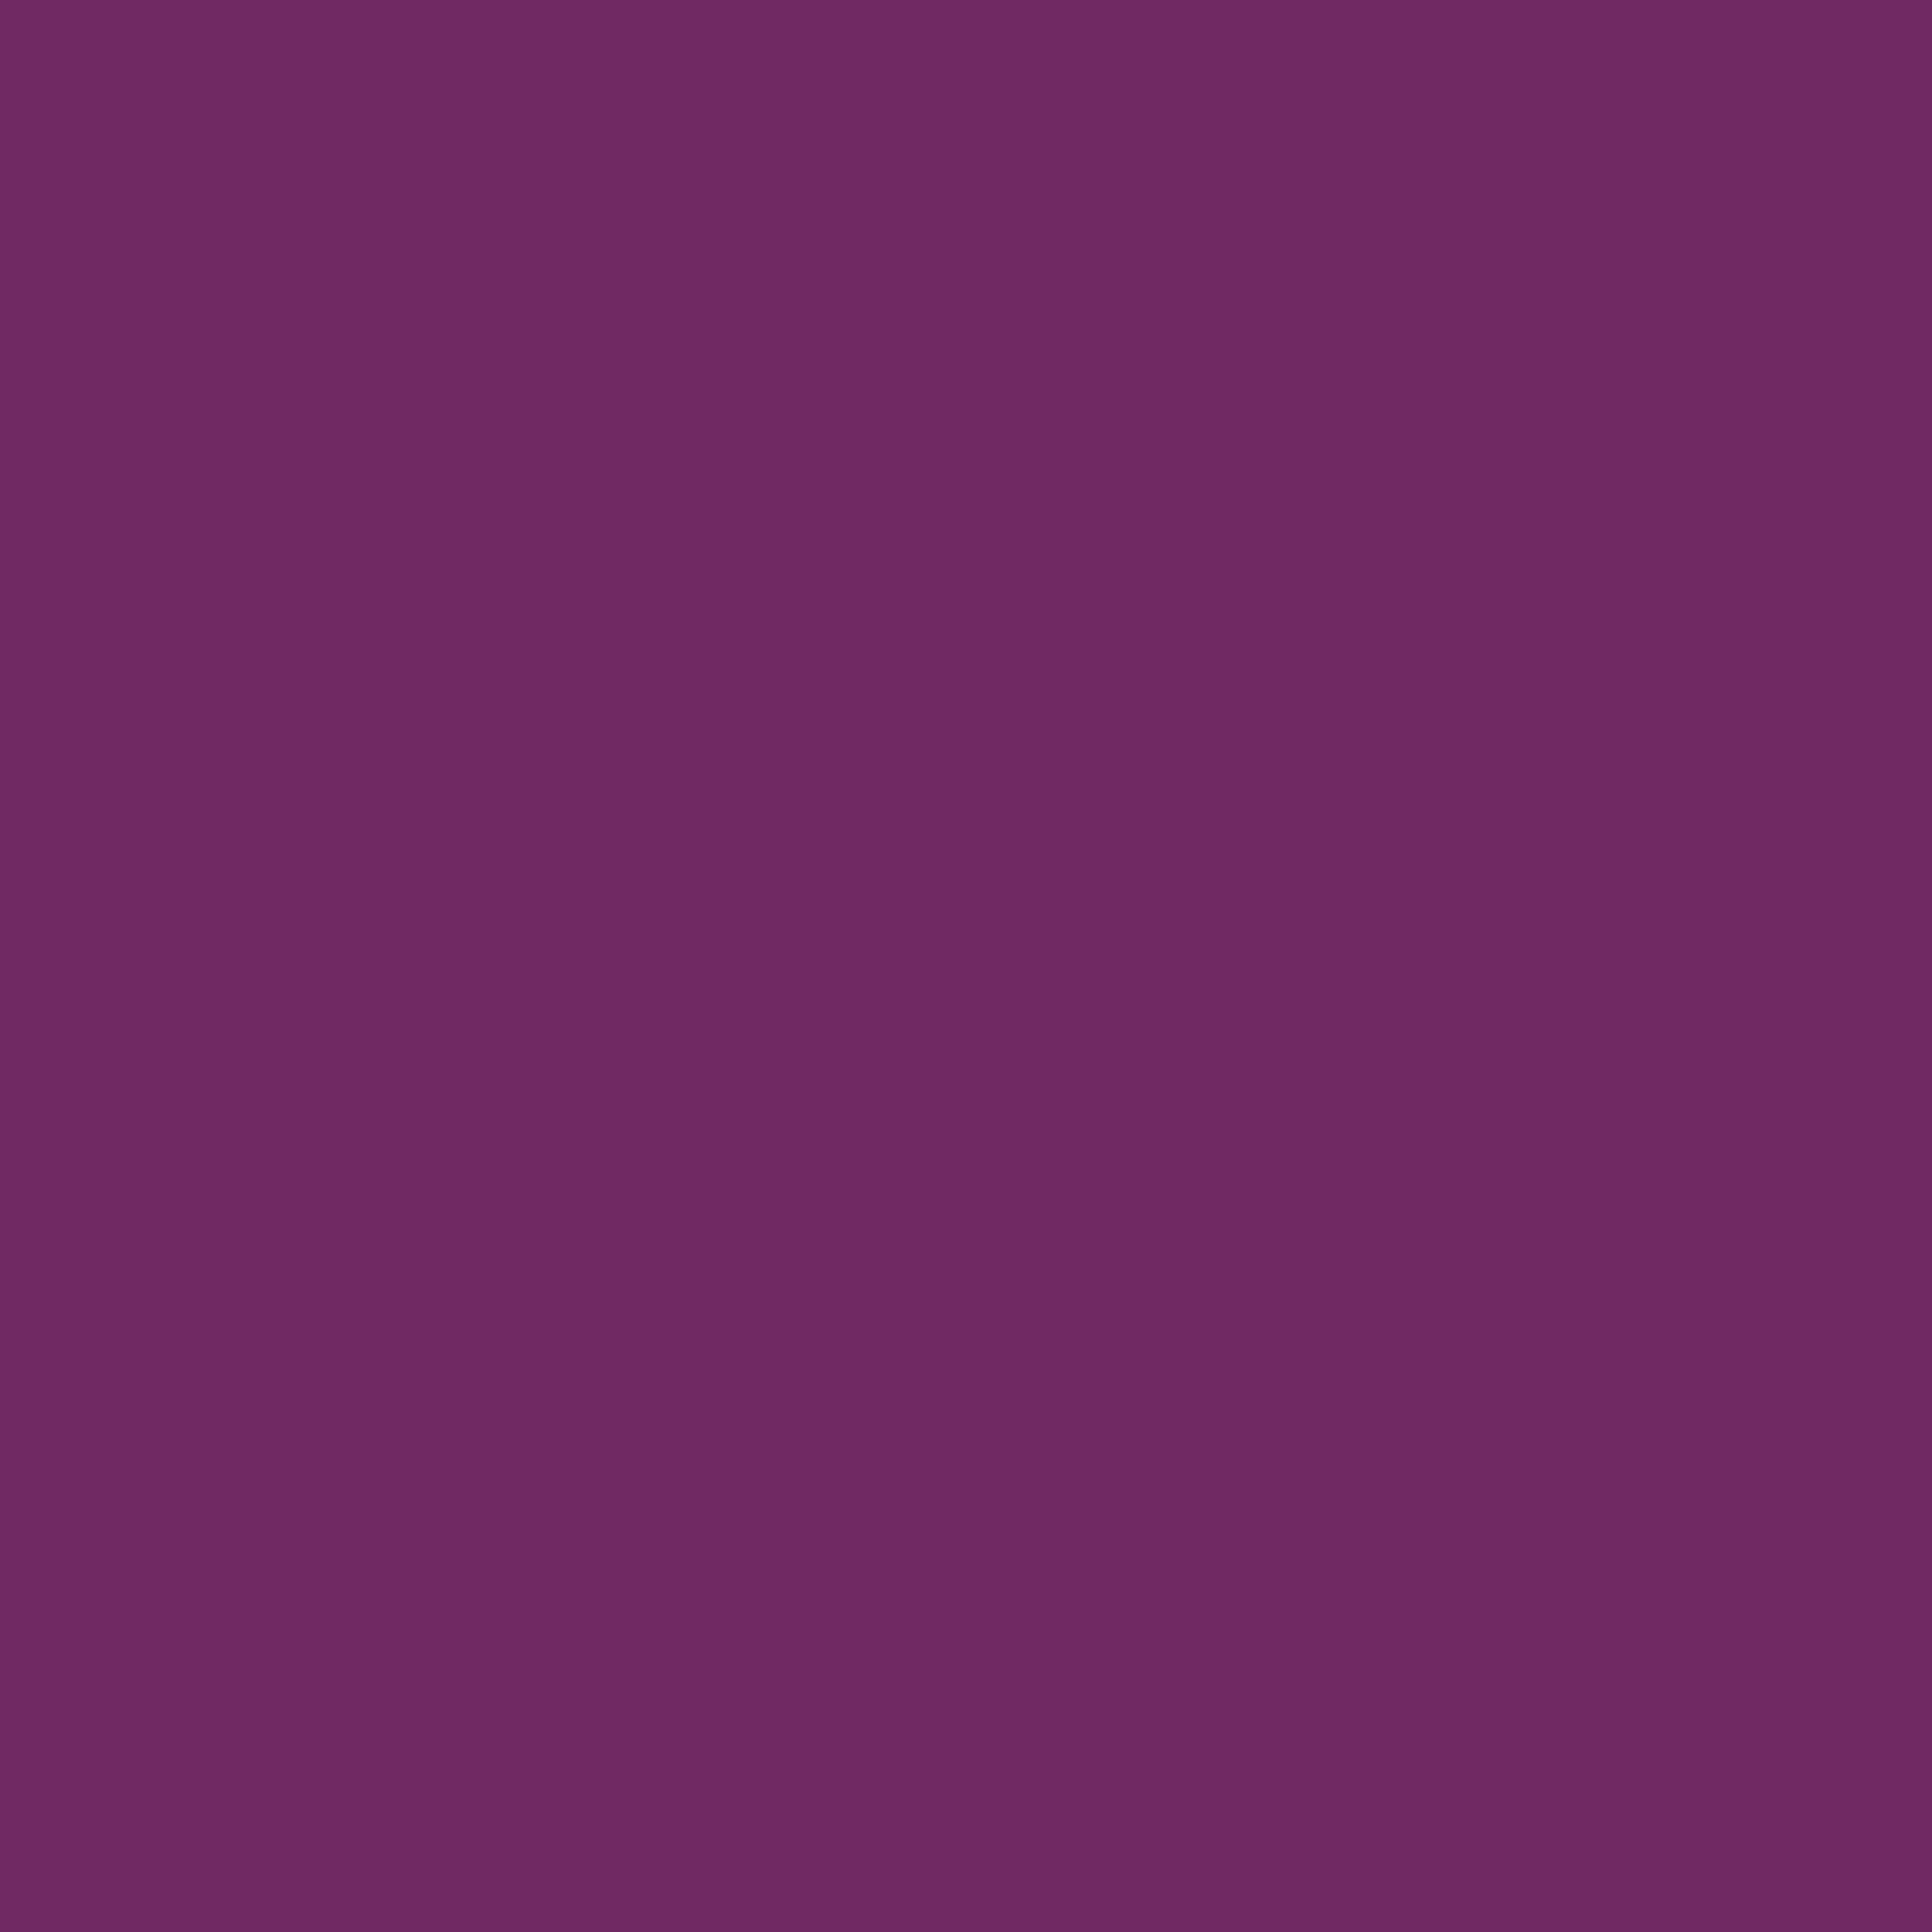 2732x2732 Byzantium Solid Color Background